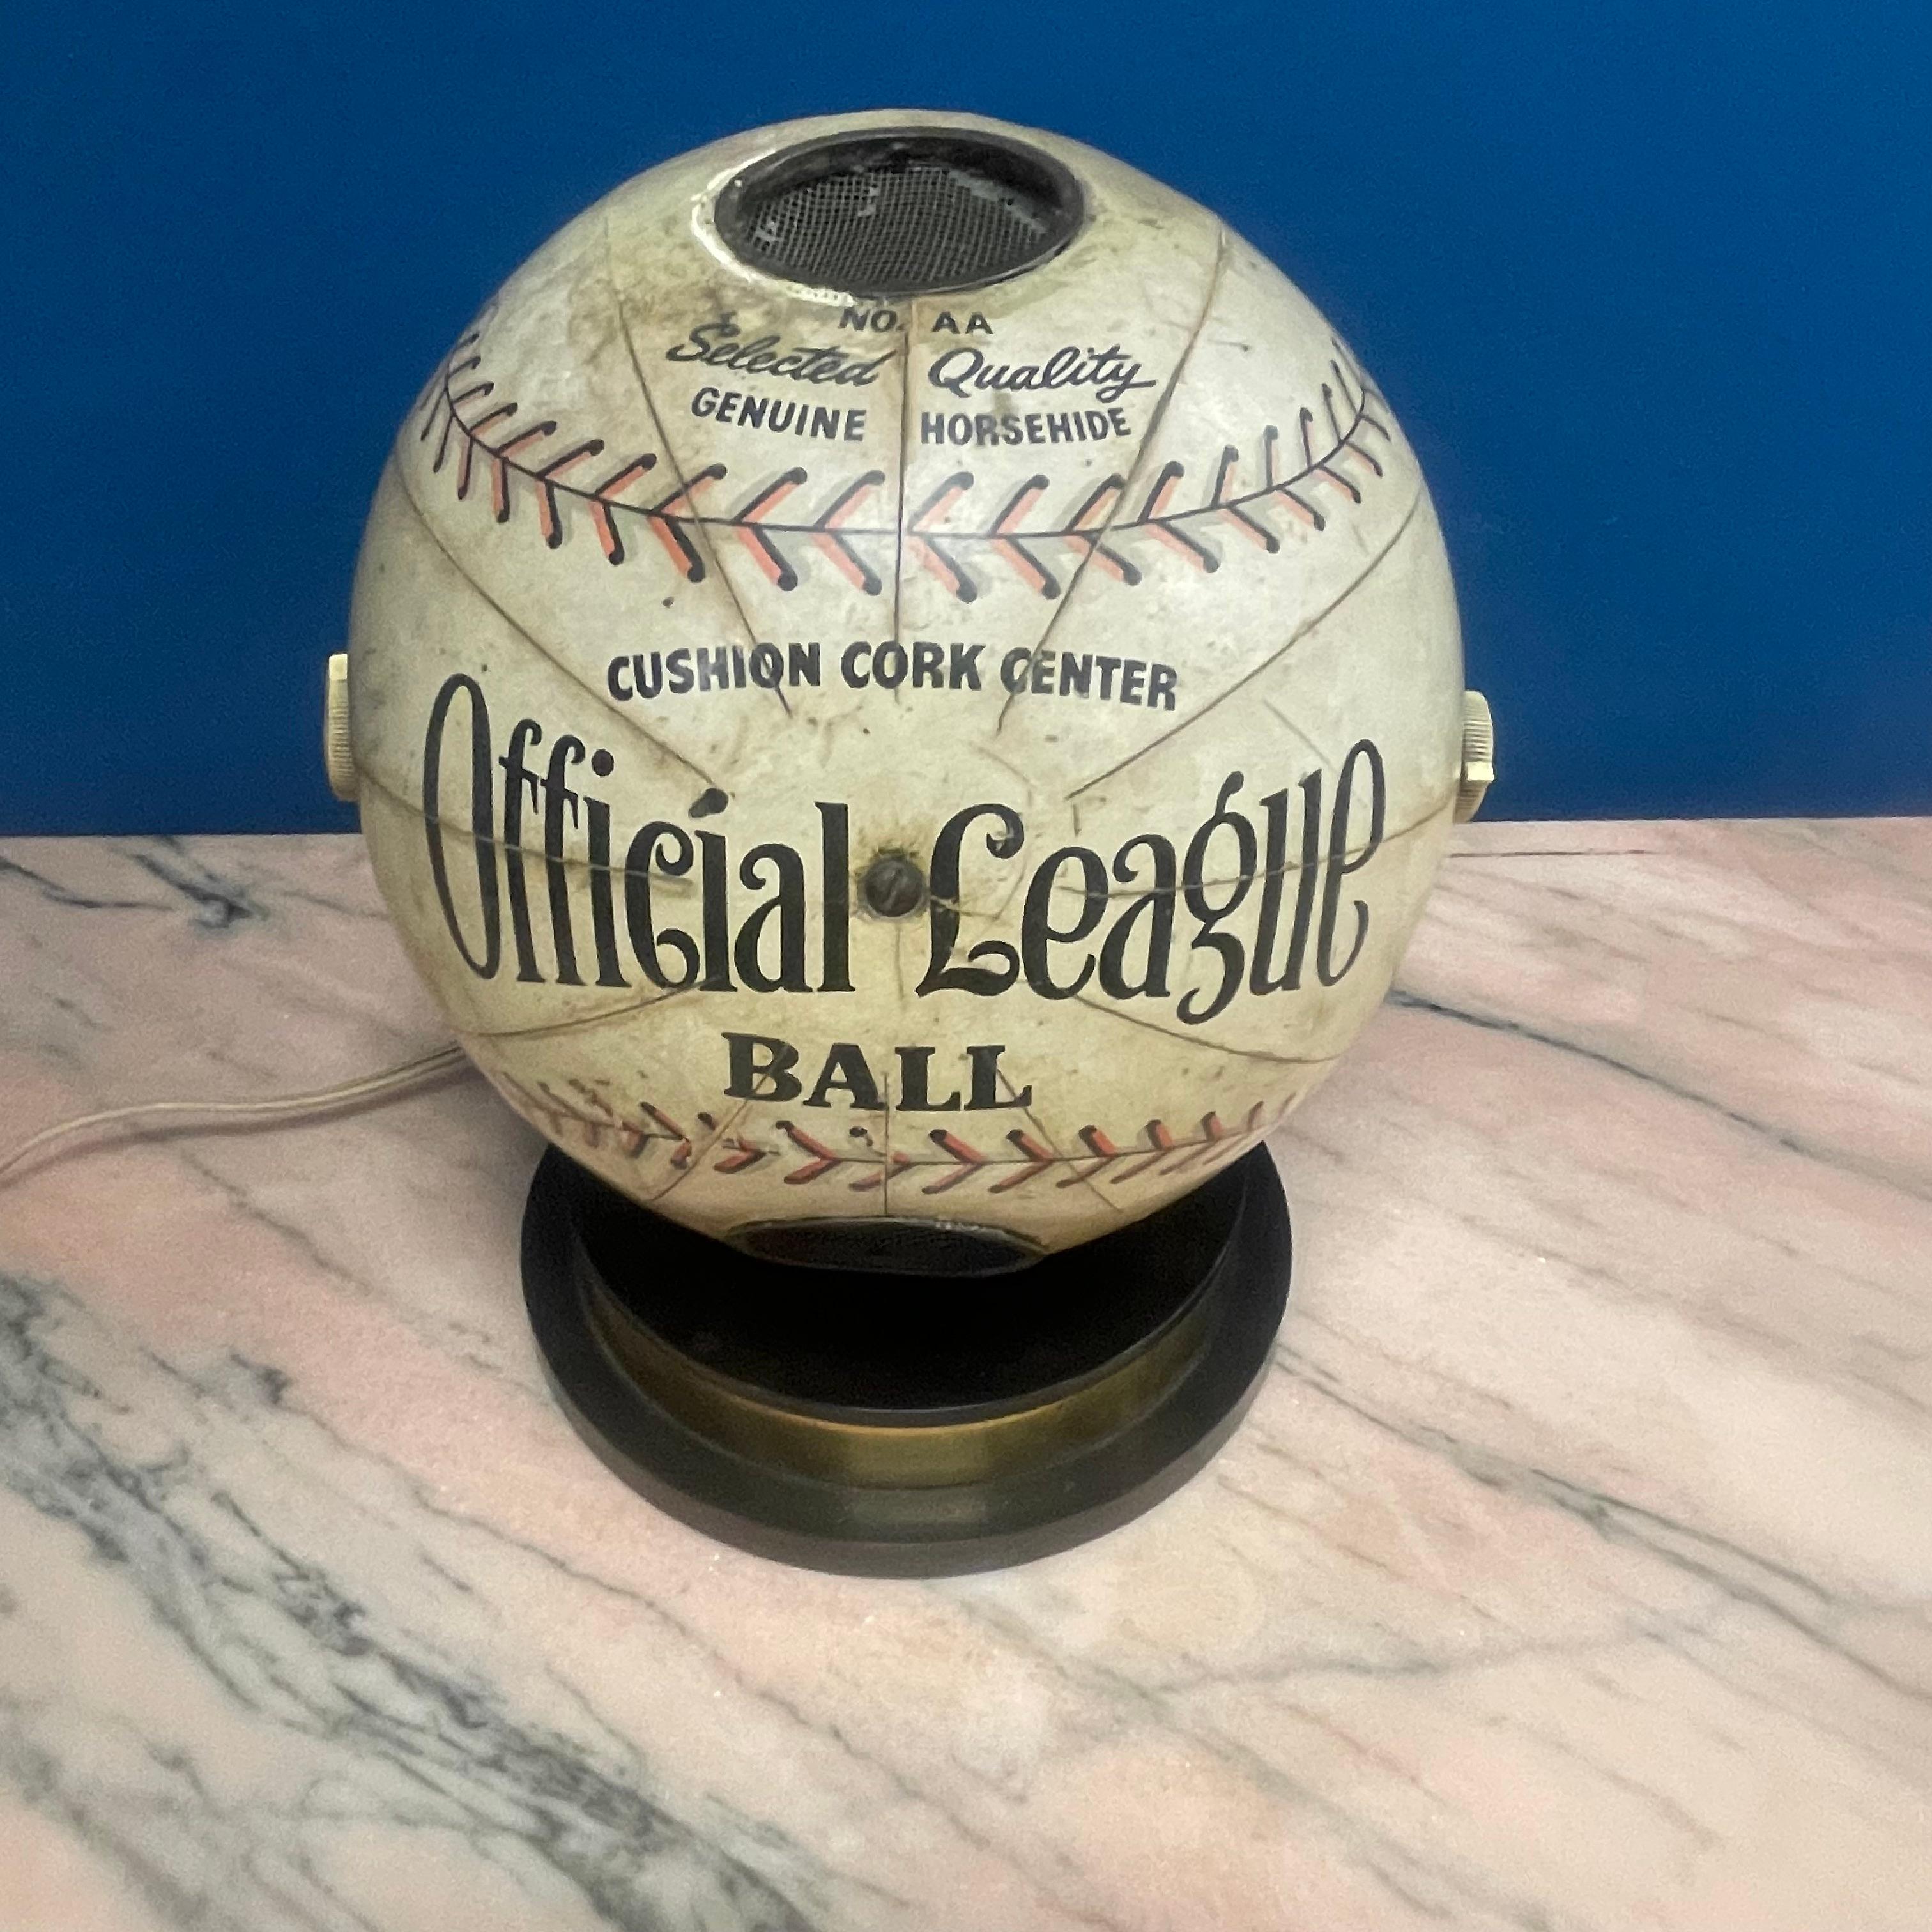 This fantastic novelty item is reminiscent of a time when radio was king and radio broadcasts were the most popular way for fans to follow Major League Baseball across the country. Eight-inch in diameter baseball-shaped radio is constructed of heavy